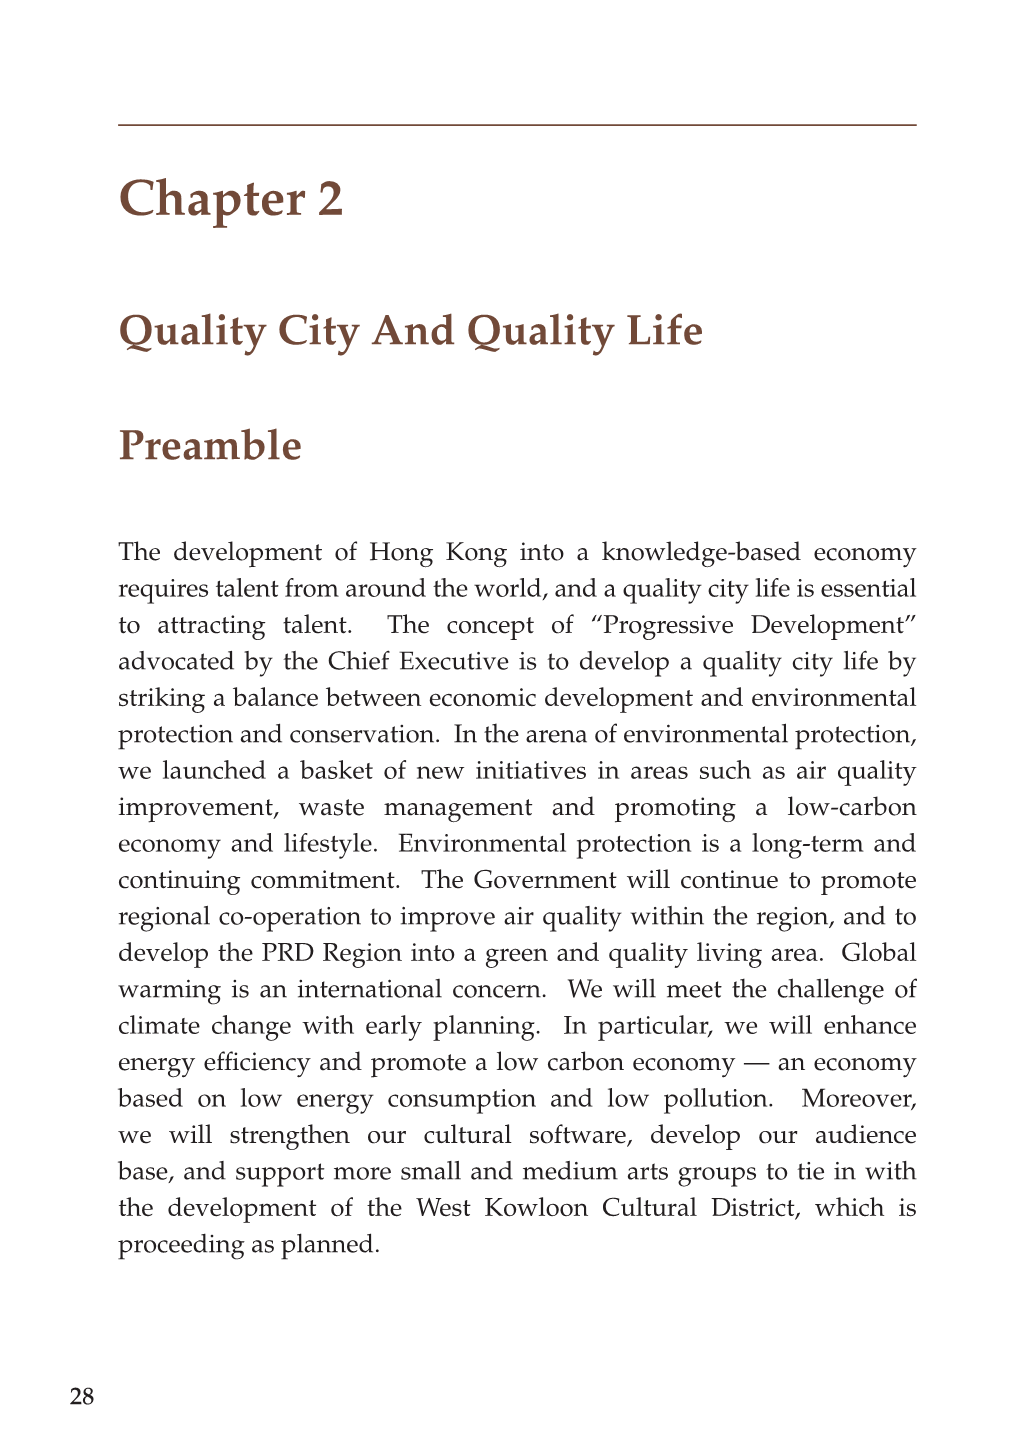 Chapter 2 Quality City and Quality Life